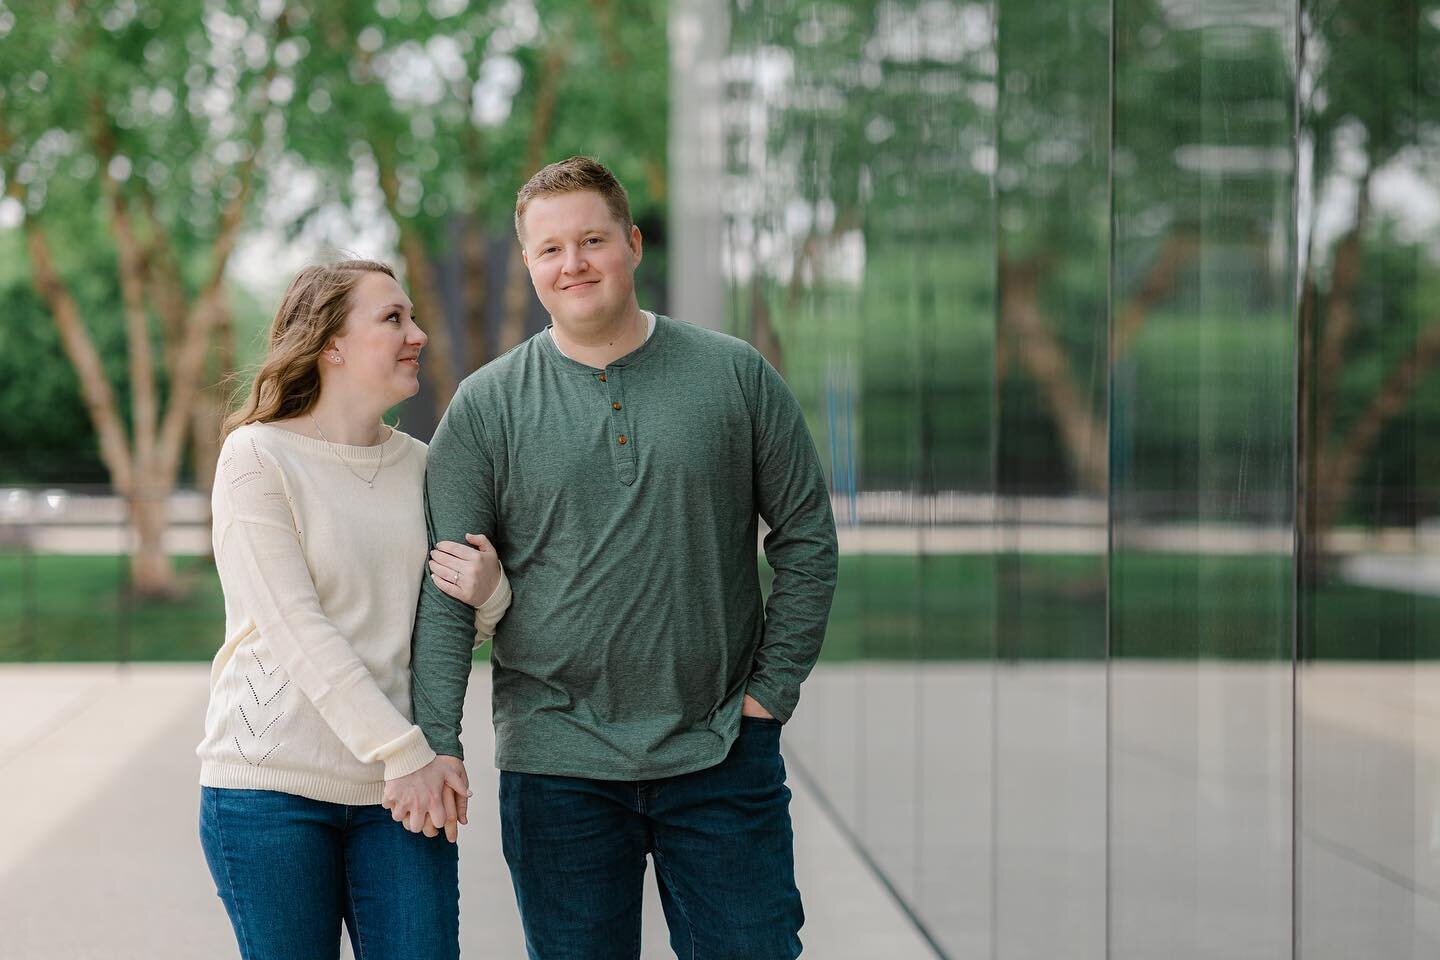 Aidan + Kallie made the drive all the way to St. Louis last weekend for their engagement session! Can&rsquo;t wait to travel to you next May for your wedding day! 

We started our morning with Blueprint Coffee on Washington Ave. and ended our day wit